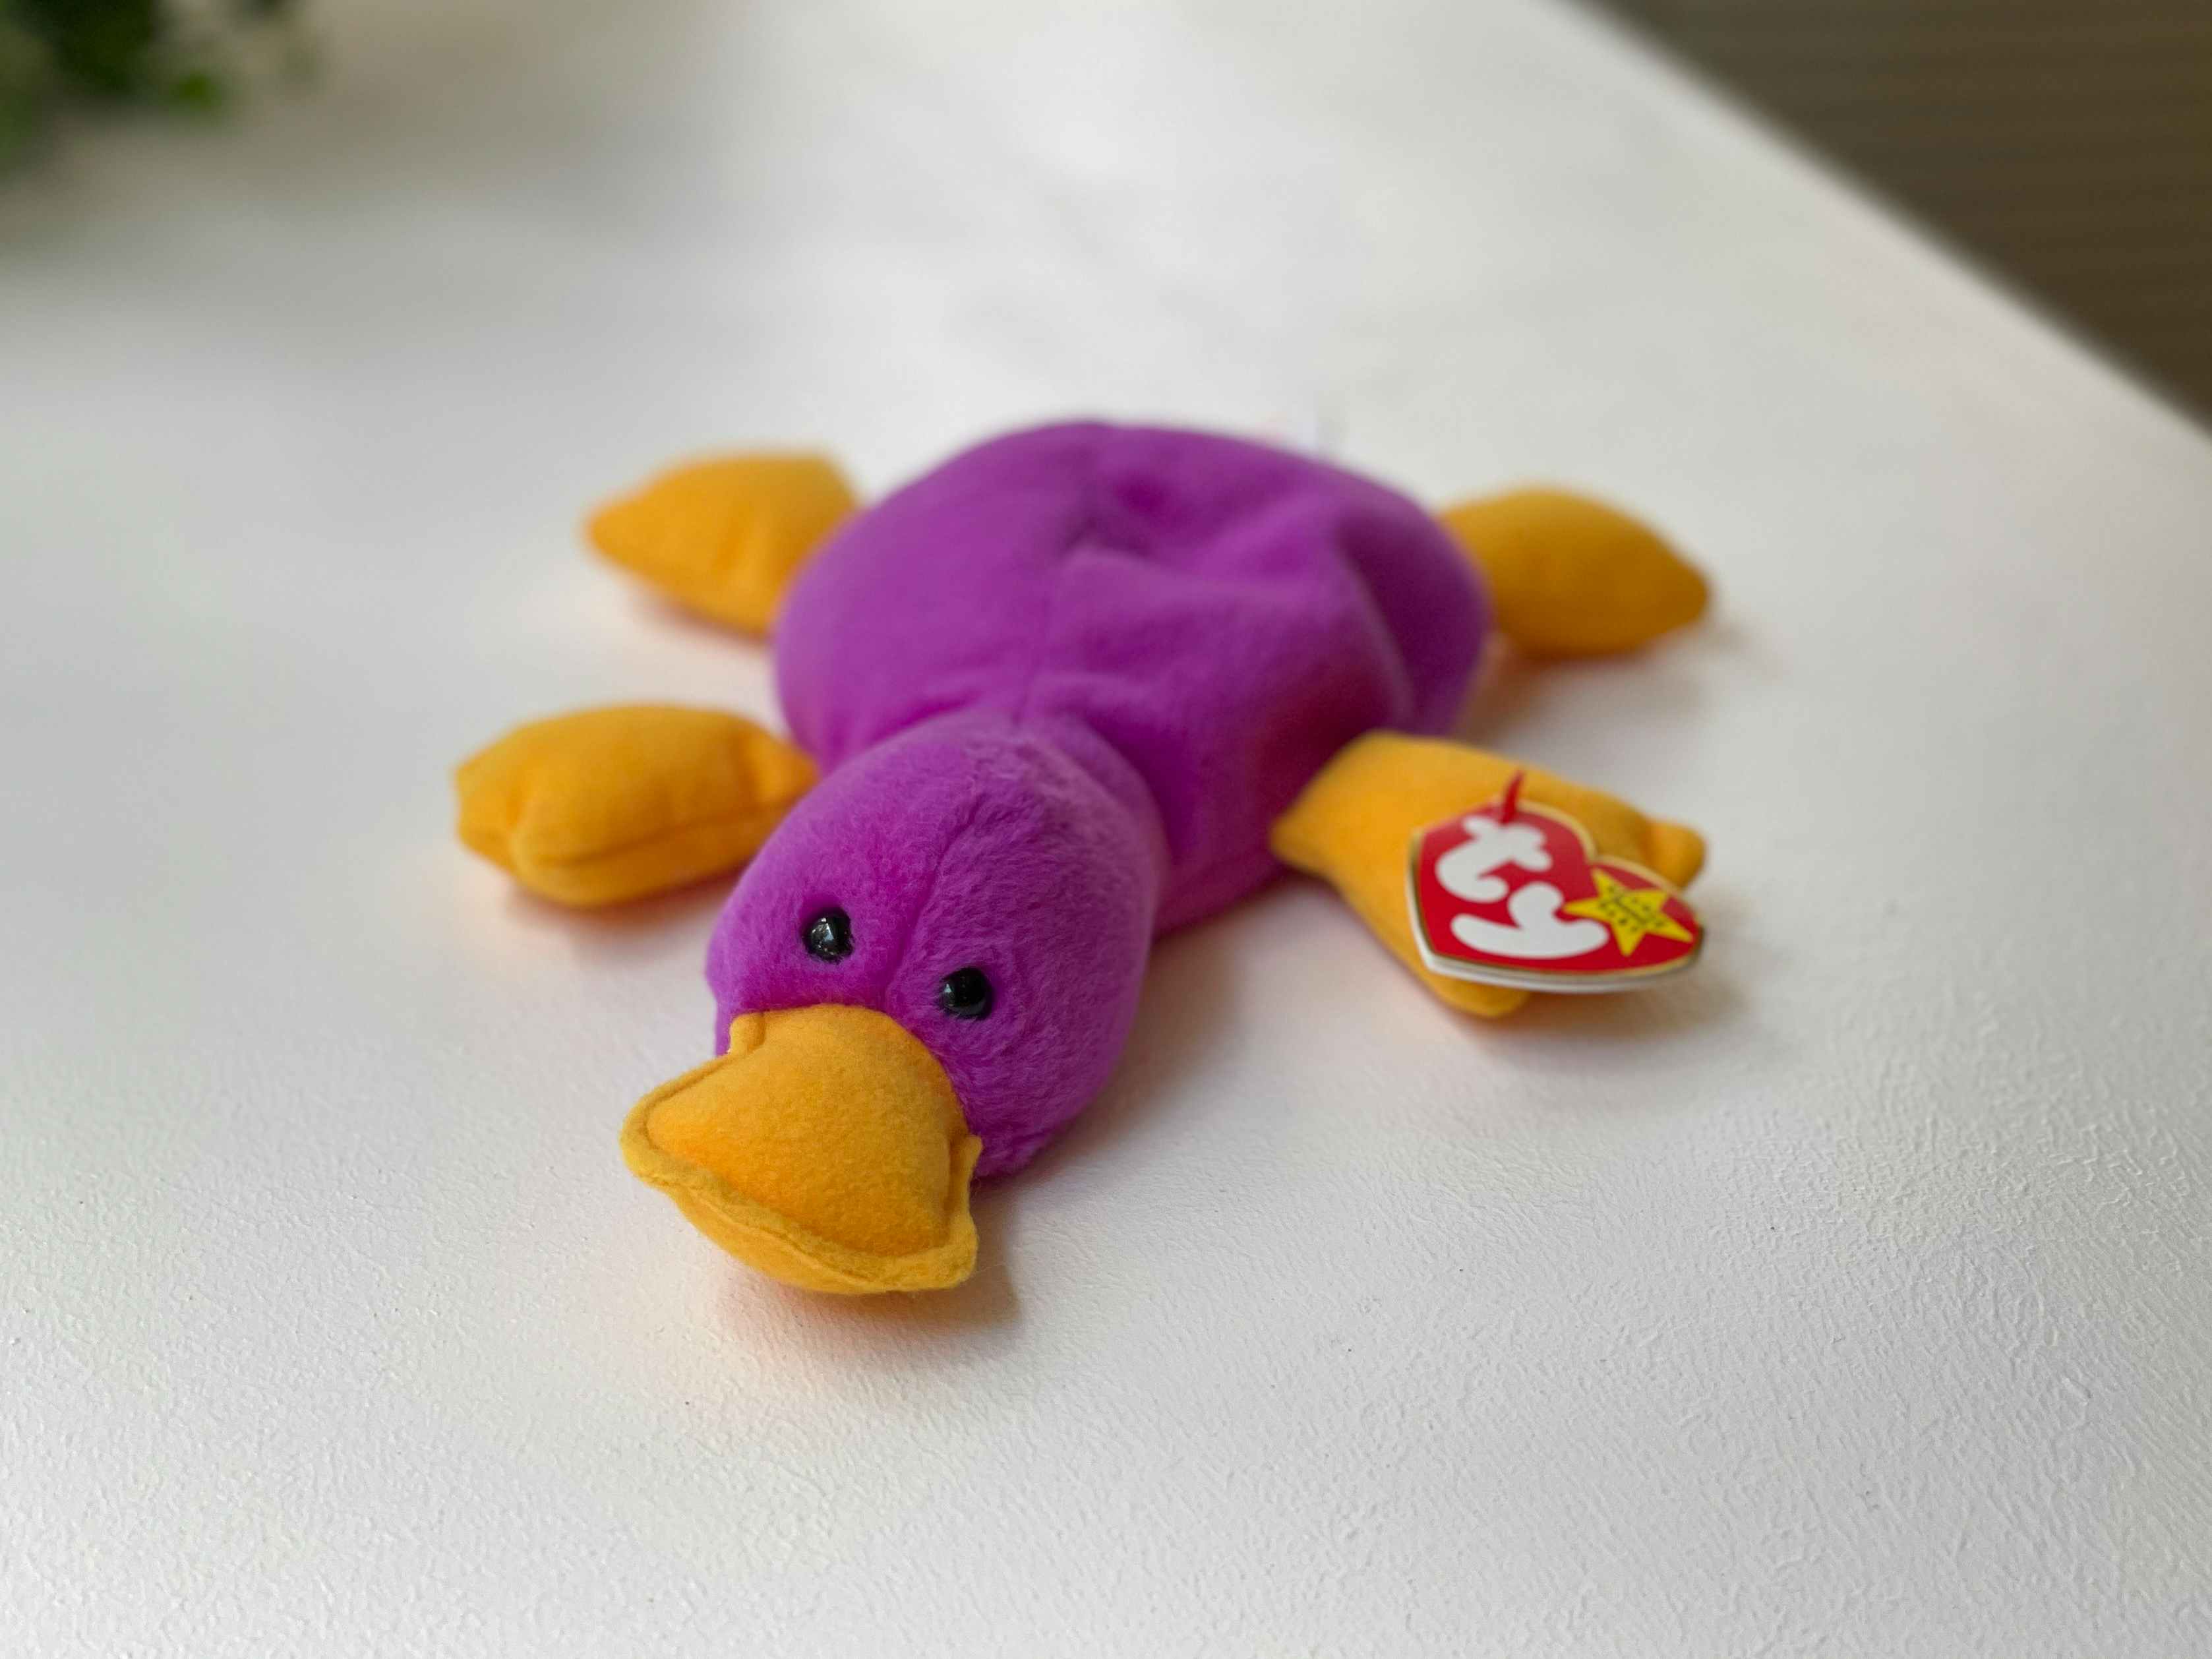 A Patti the Platypus beanie baby sitting on a white table.